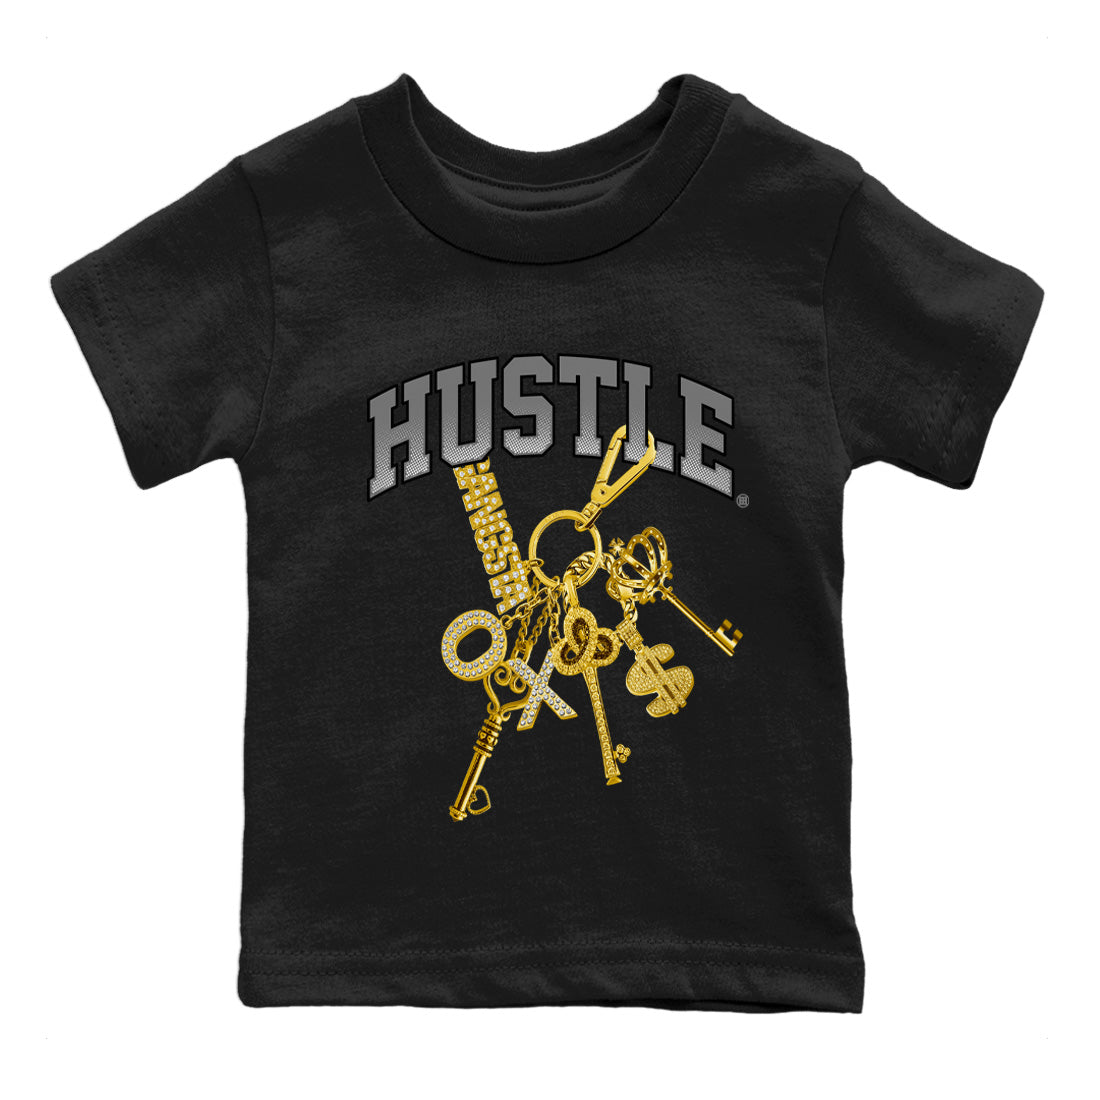 Air Jordan 11 White Cement Gold Hustle Baby and Kids Sneaker Tees Air Jordan 11 Cement Grey Kids Sneaker Tees Washing and Care Tip